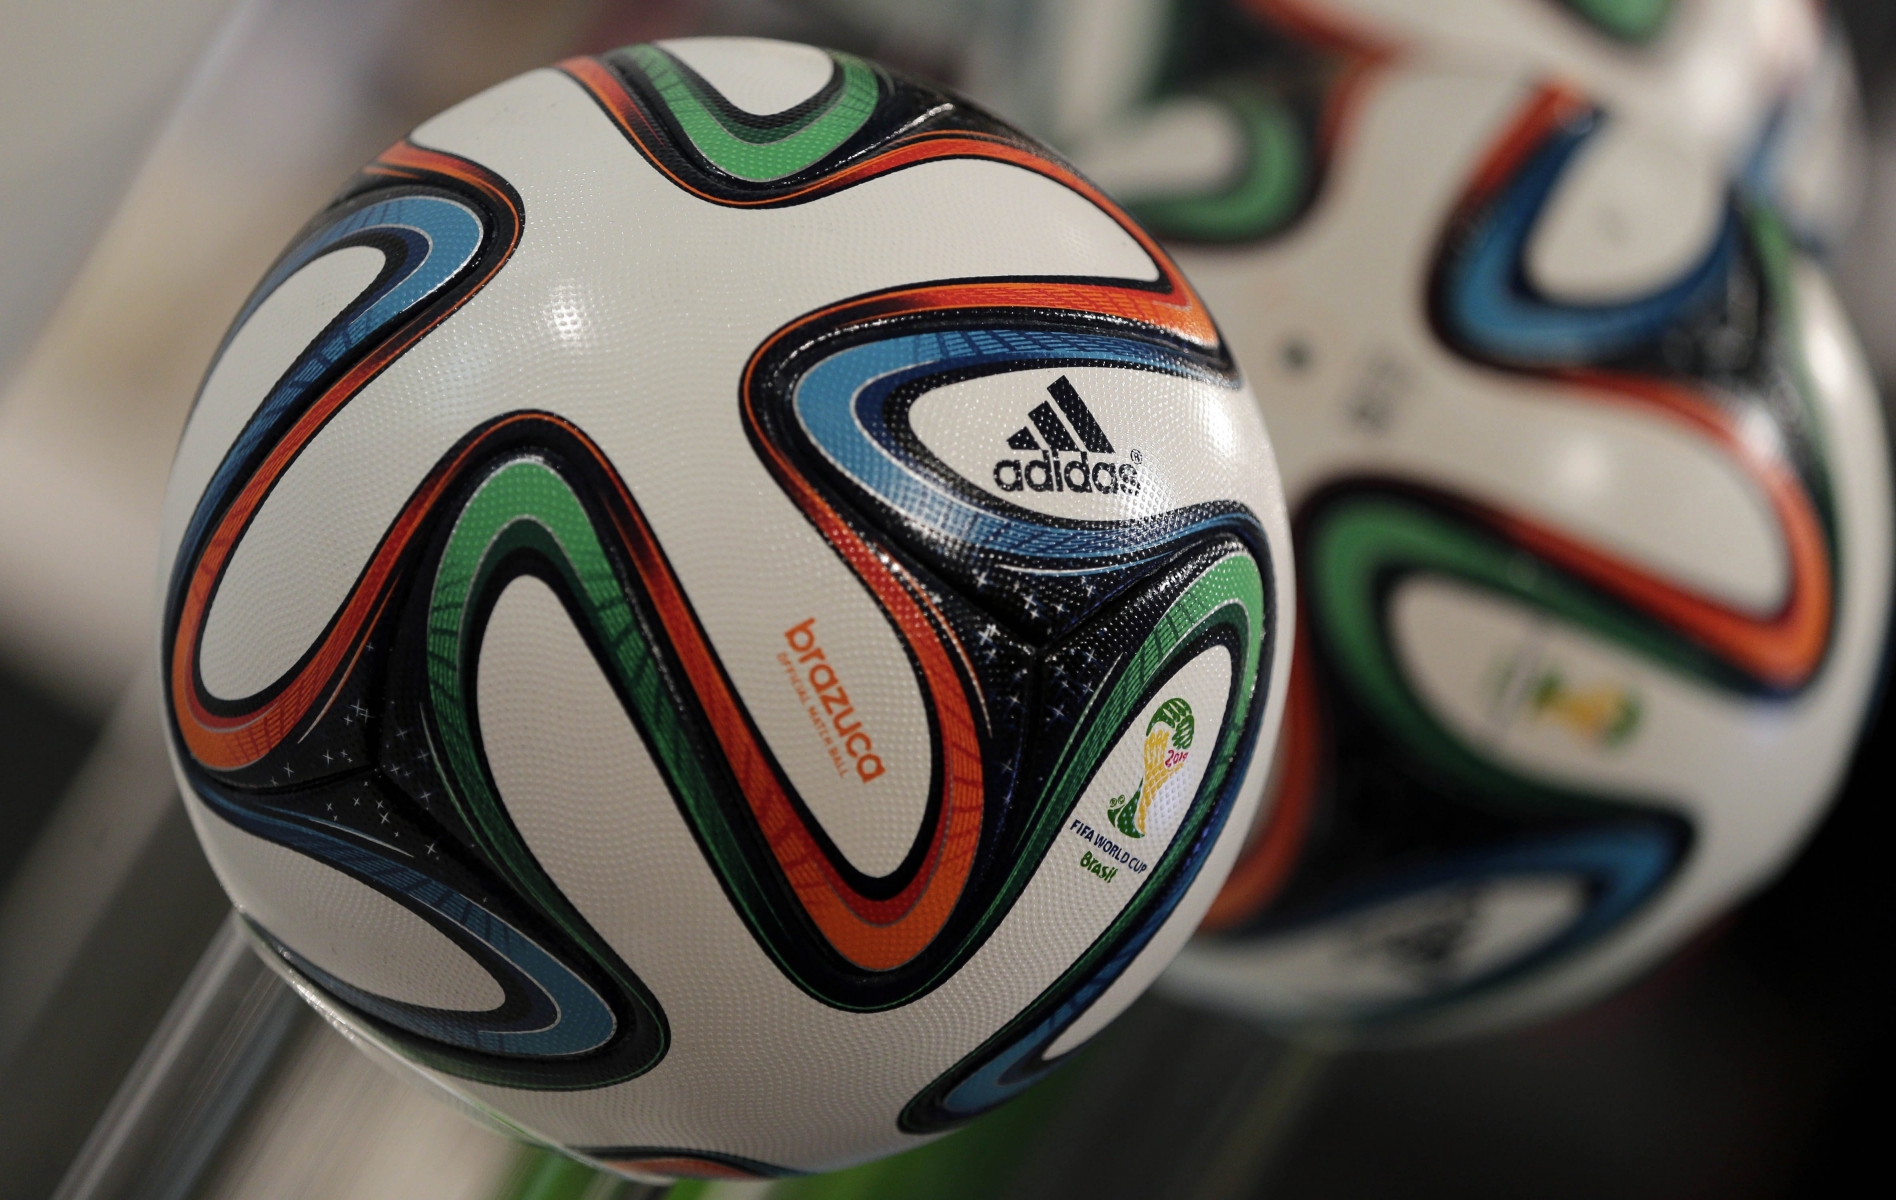 The adidas logo is printed on "Brazuca", the official FIFA World Cup 2014 soccer ball, during the annual shareholders meeting in Fuerth, Germany, Thursday, May 8, 2014. In the first quarter of 2014, Group revenues remained stable on a currency-neutral basis. Currency translation effects had a significant negative impact on sales in euro terms. Group revenues decreased 6% to euro 3.533 billion in the first quarter of 2014 from euro 3.751 billion in 2013. (AP Photo/Matthias Schrader) Germany Earns Adidas